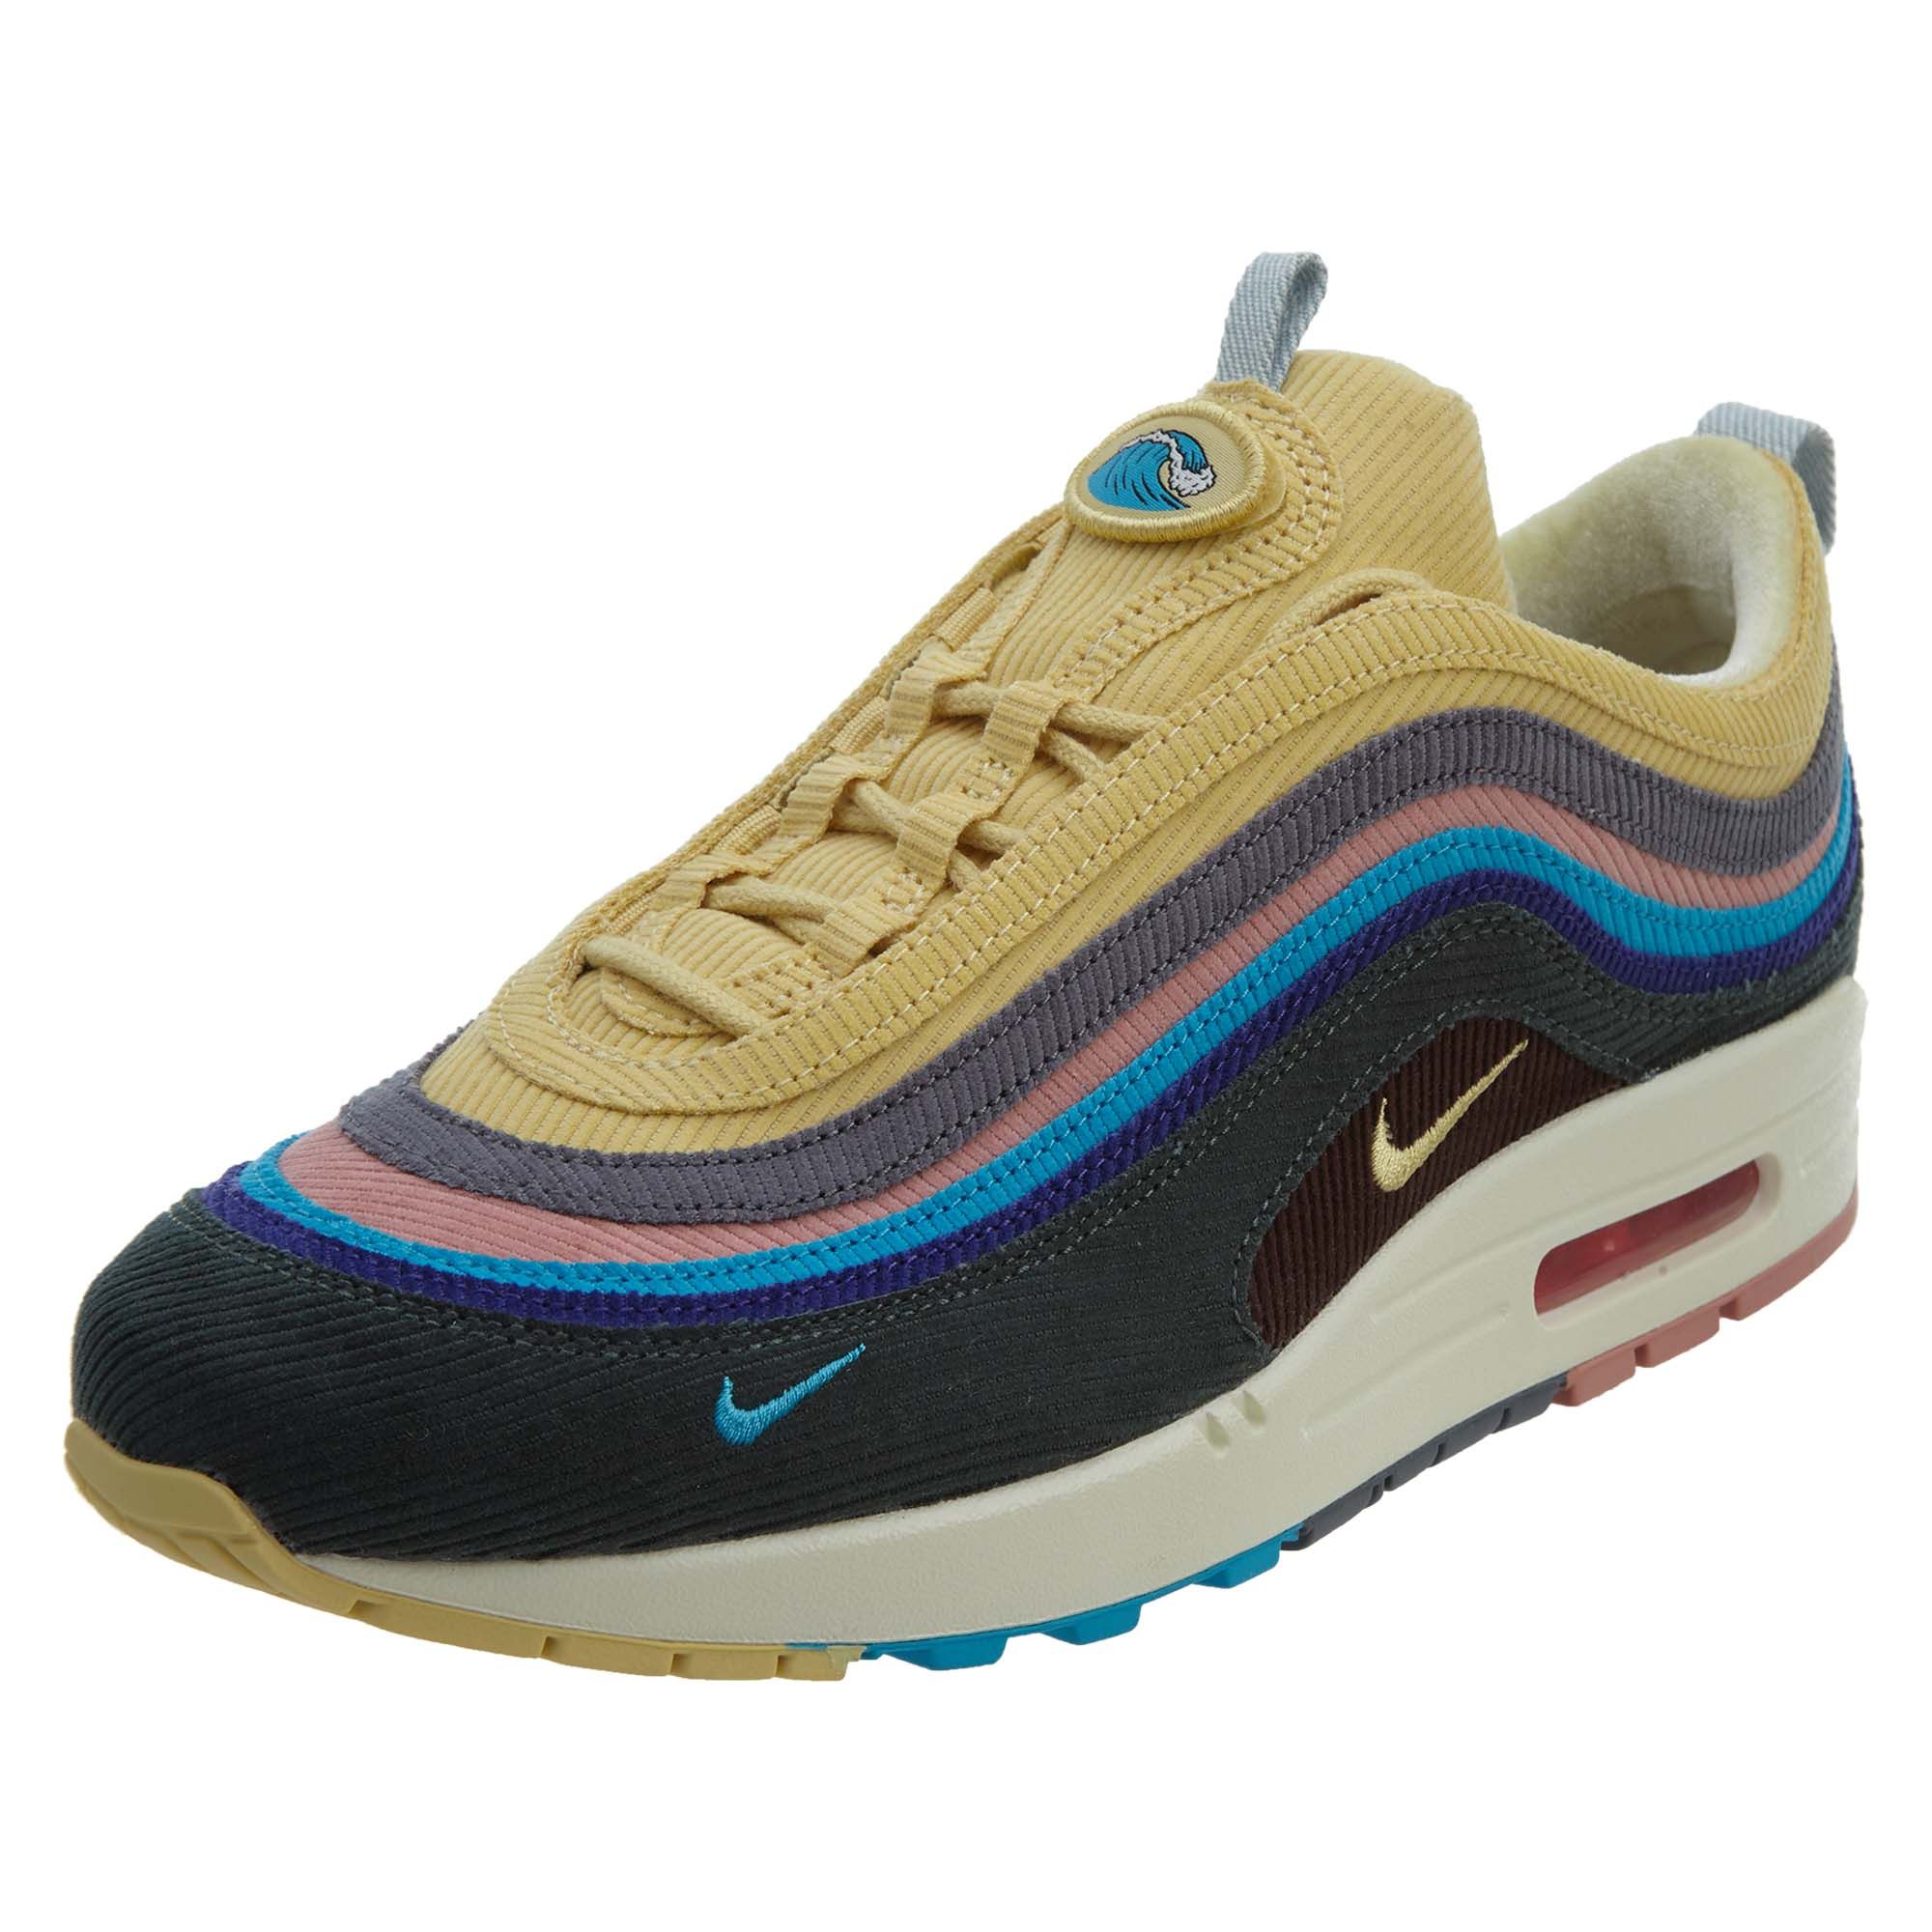 nike air max one 97 sean wotherspoon